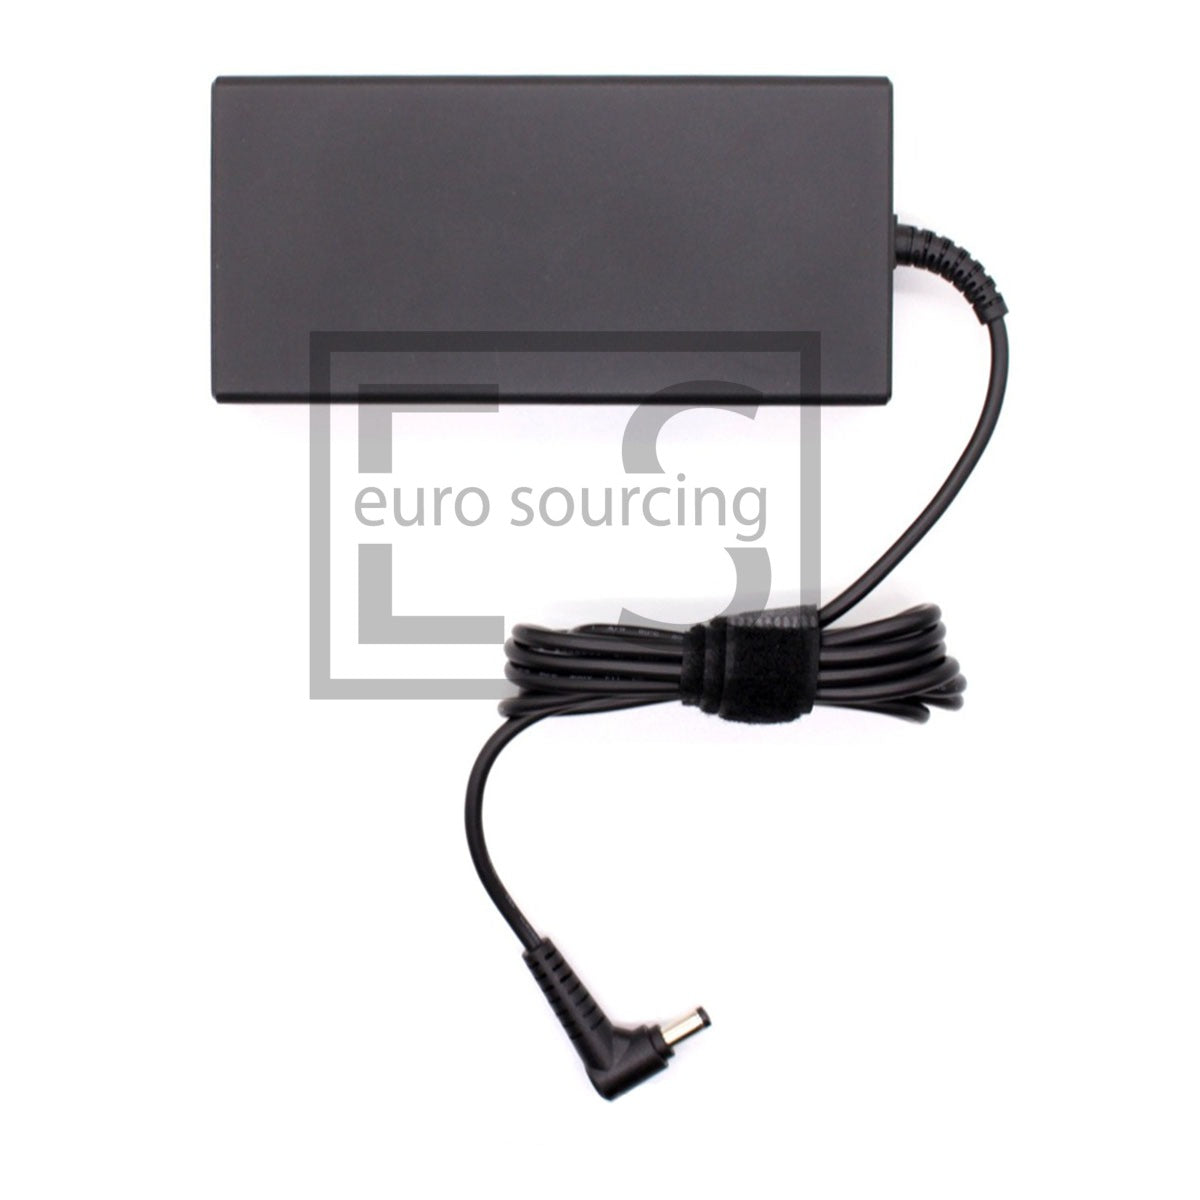 Genuine Delta 180W 19.5V 9.23A 5.5MM x 2.5MM Gaming Laptop Adapter Power Supply Compatible With ASUS ET2300INTI-B022K